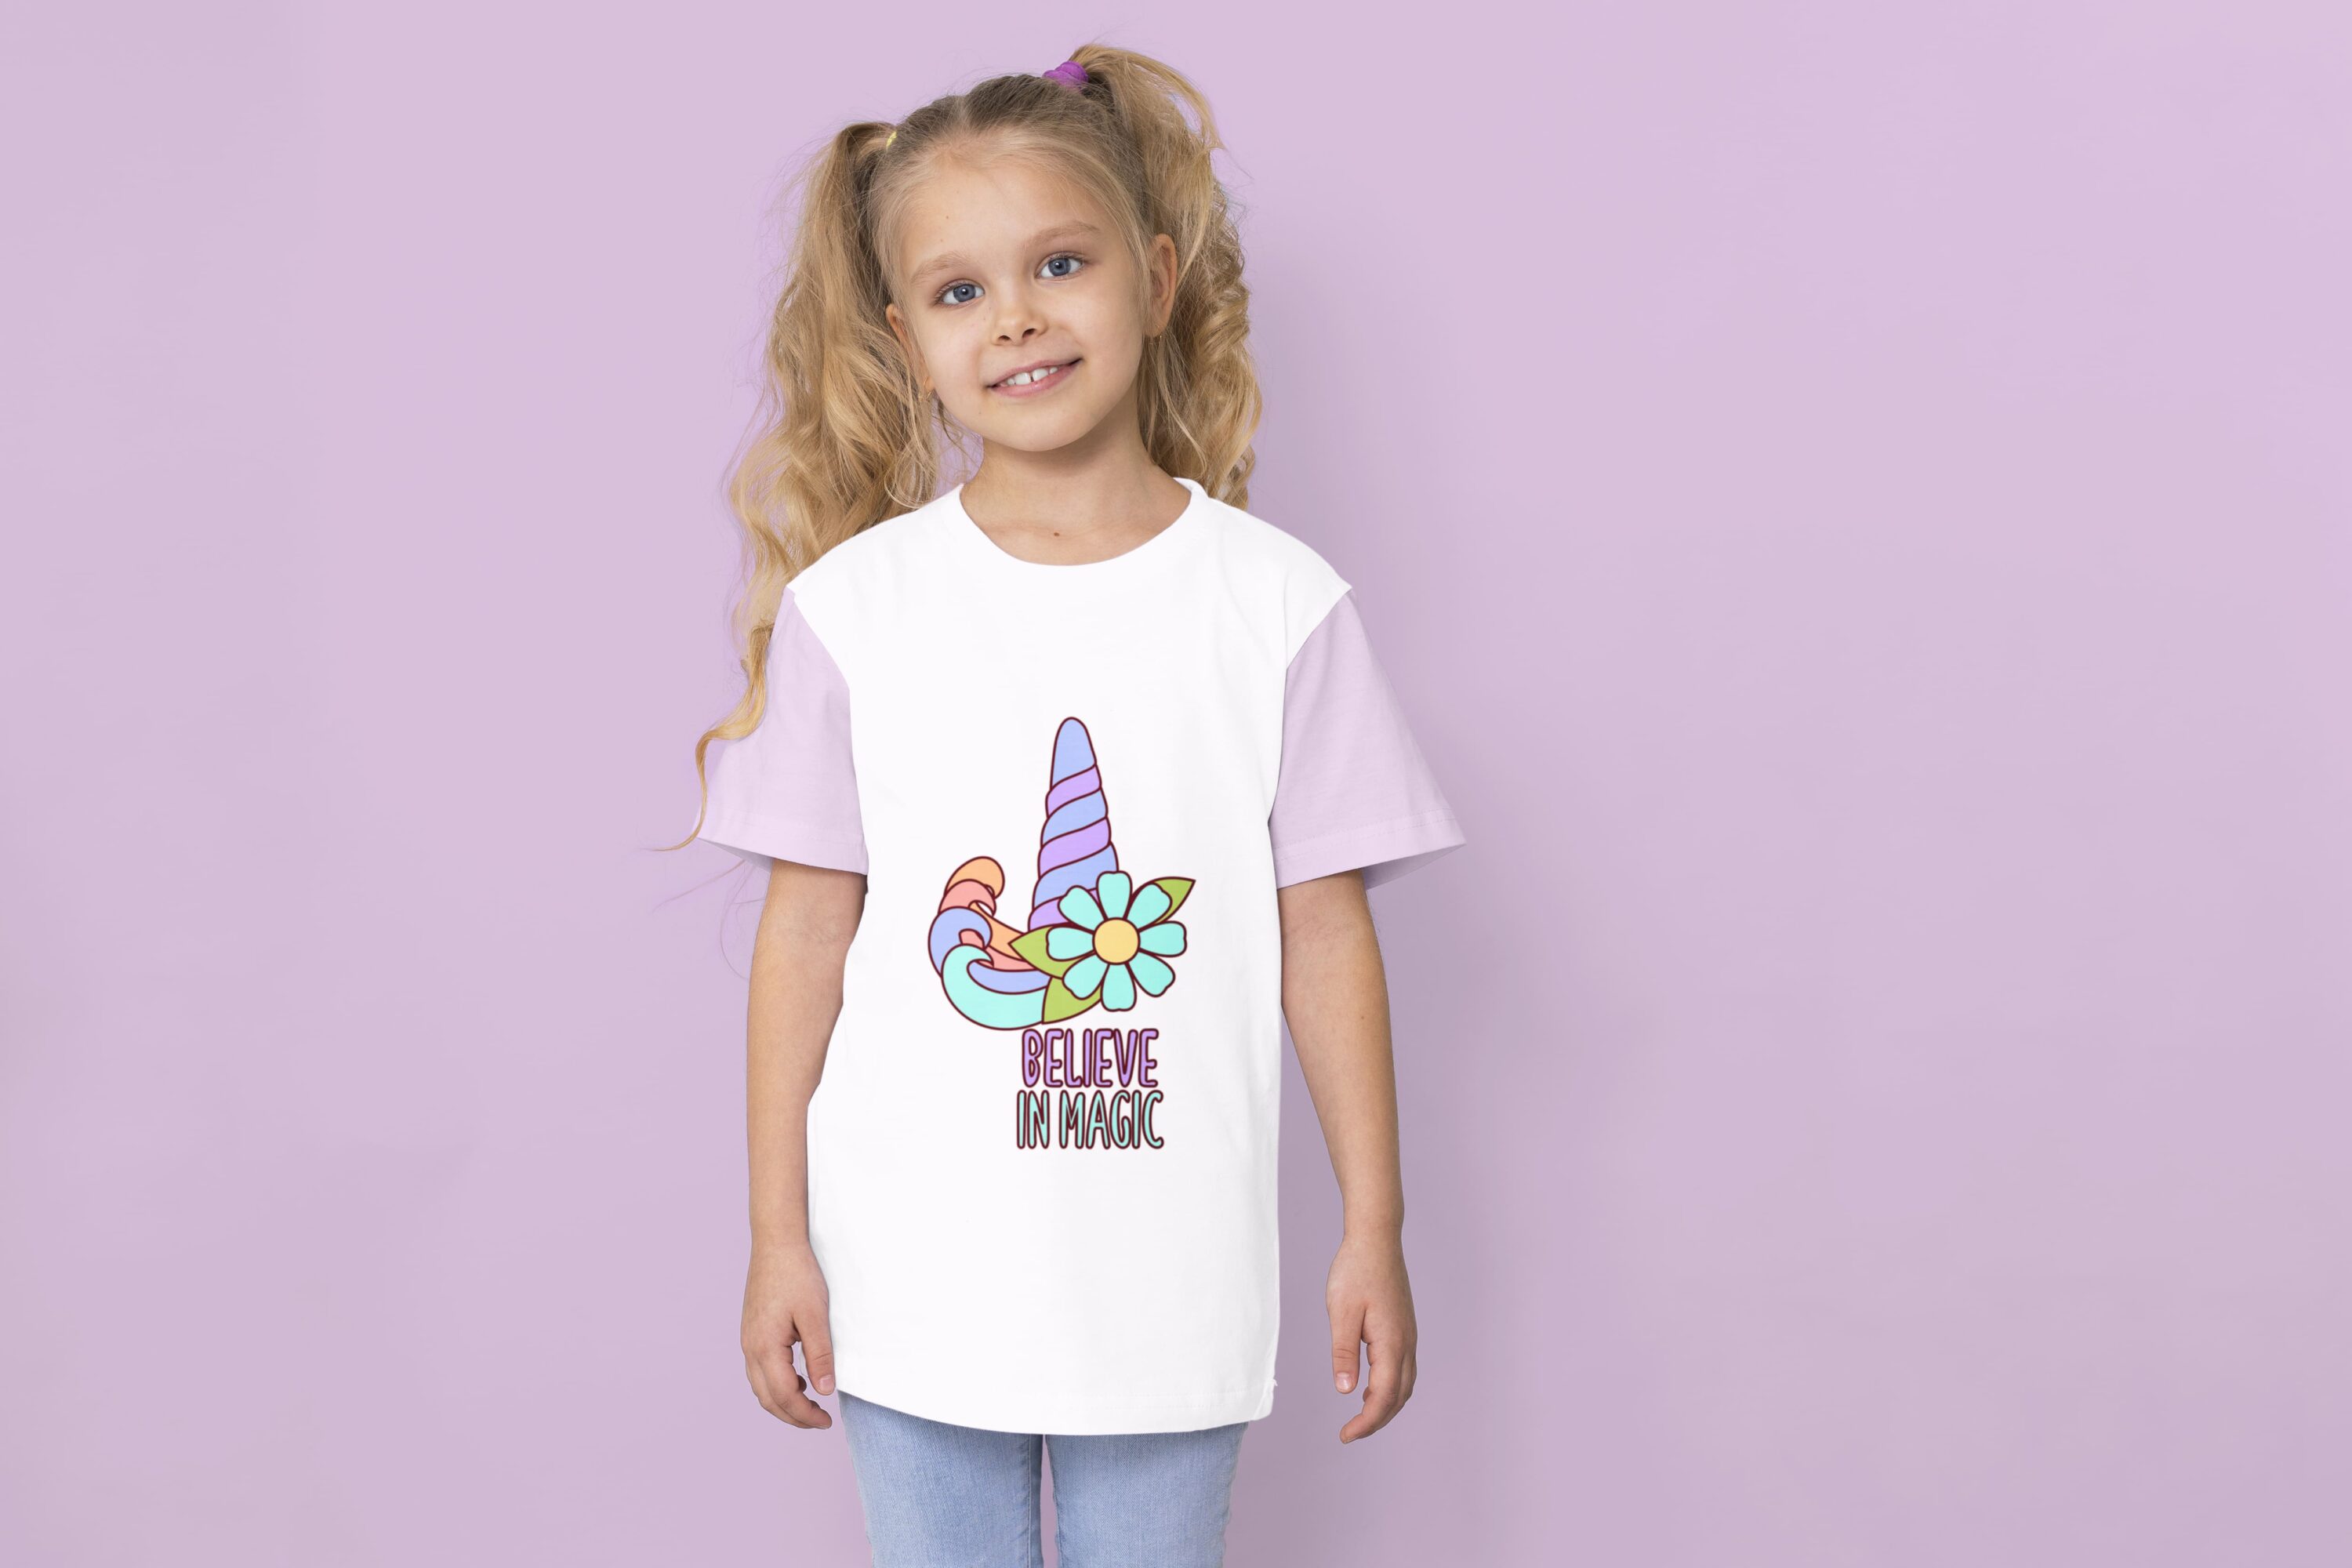 A white t-shirt with lavender sleeves and a blue and purple unicorn horn with a flower and purple lettering "Believe" with blue lettering "in magic" on a girl against a lavender background.